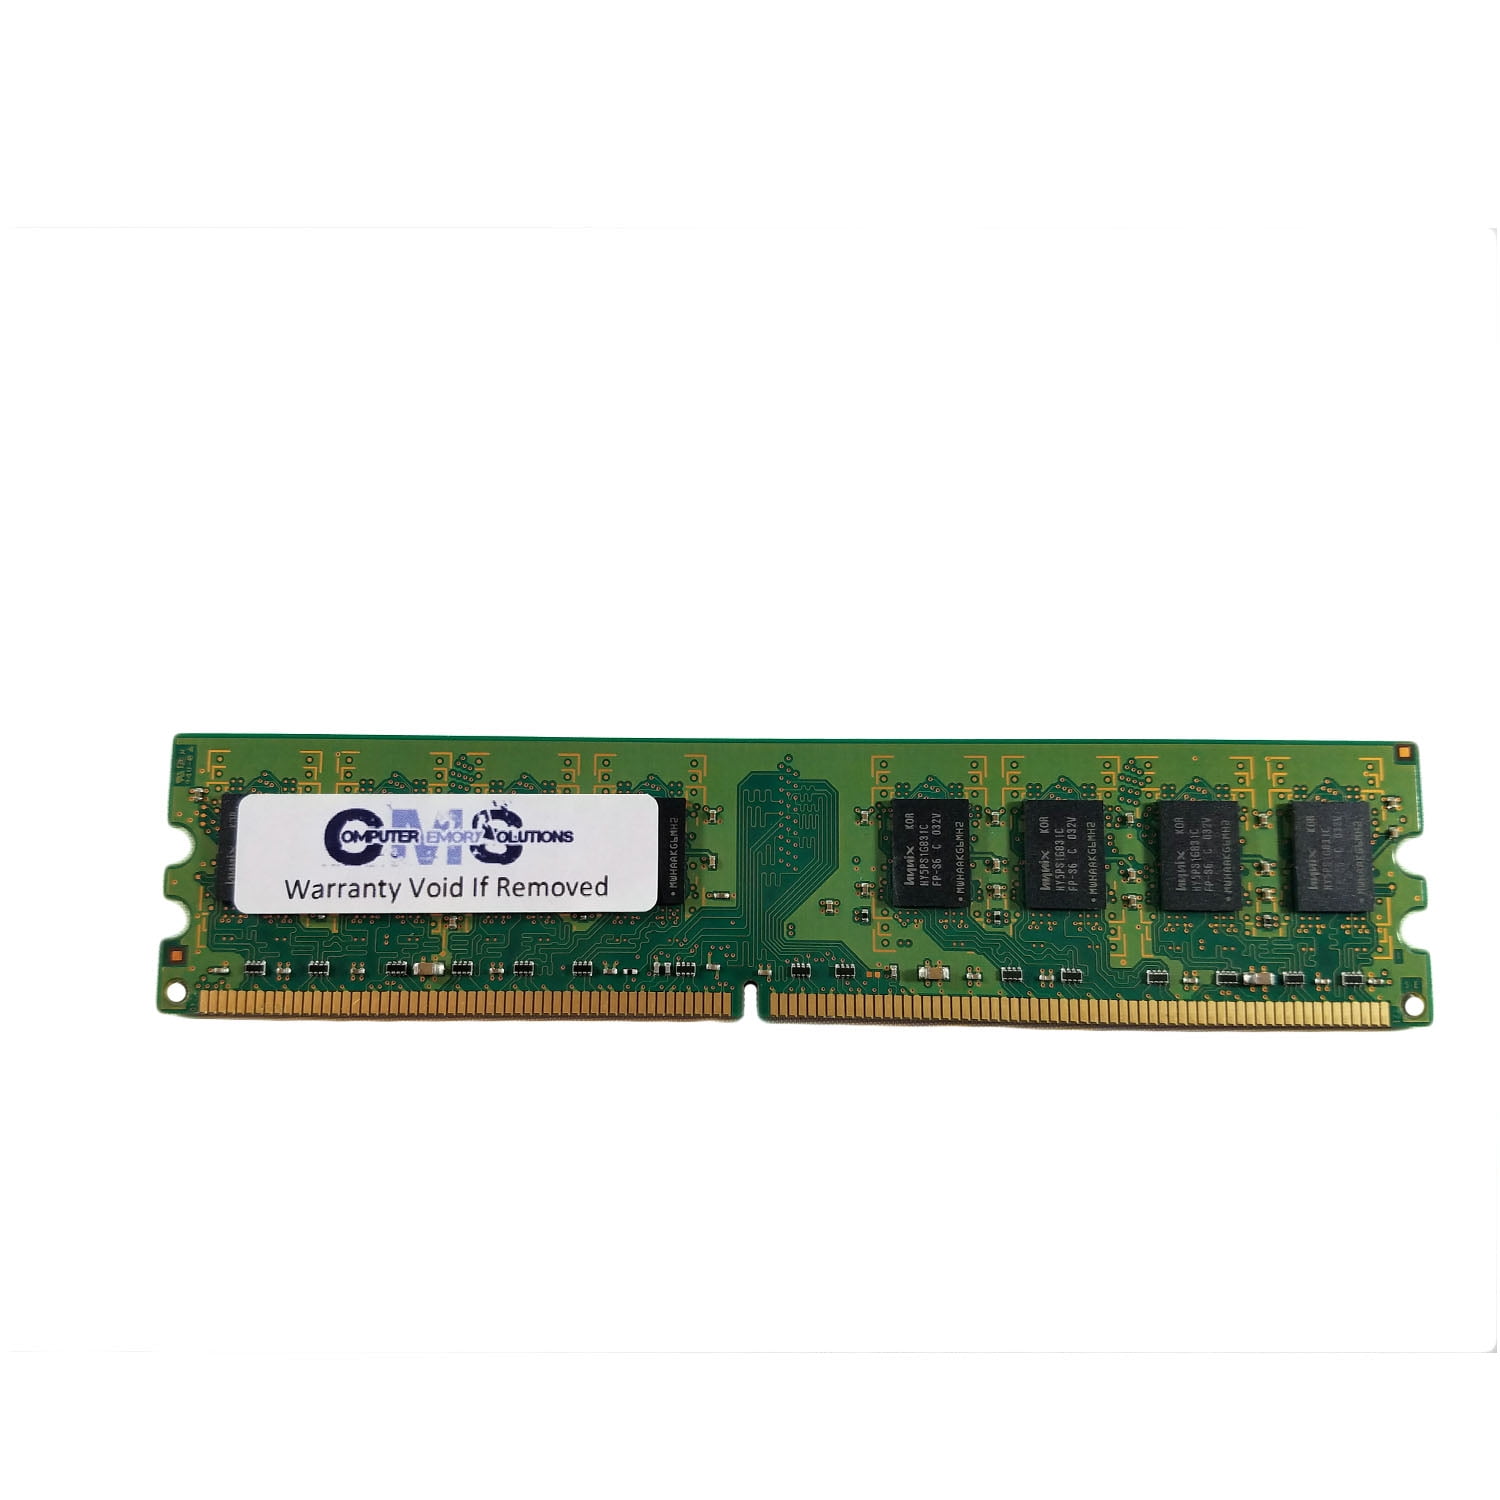 2X8GB A66 Memory Ram Compatible with Asus/Asmobile P8 Motherboard P8H61-I Lx R2.0 CMS 16GB P8H61-M Le P8H61-M 